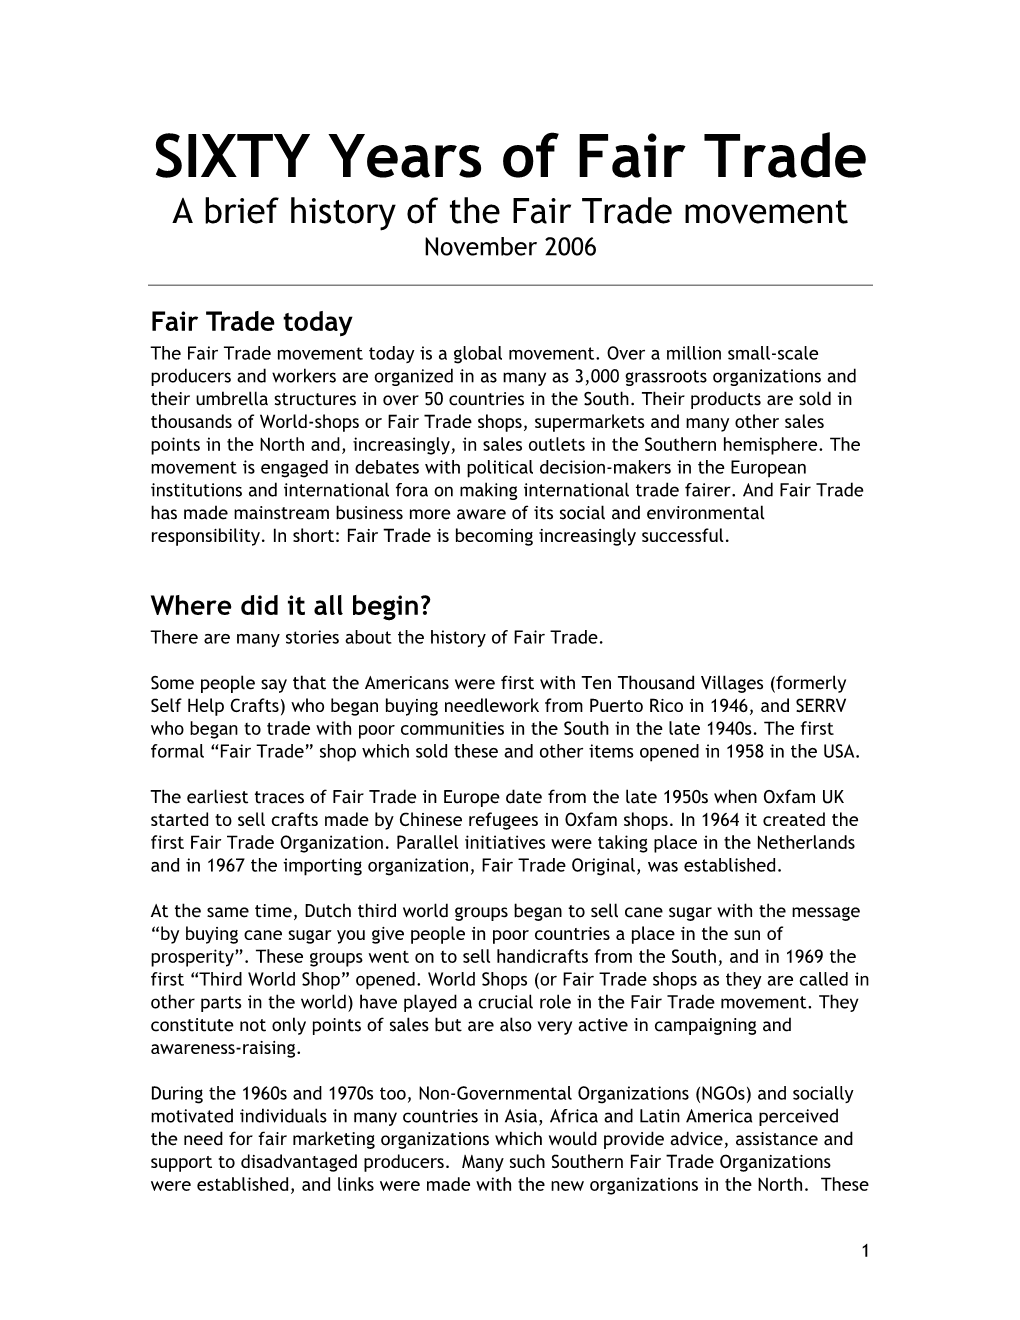 SIXTY Years of Fair Trade a Brief History of the Fair Trade Movement November 2006